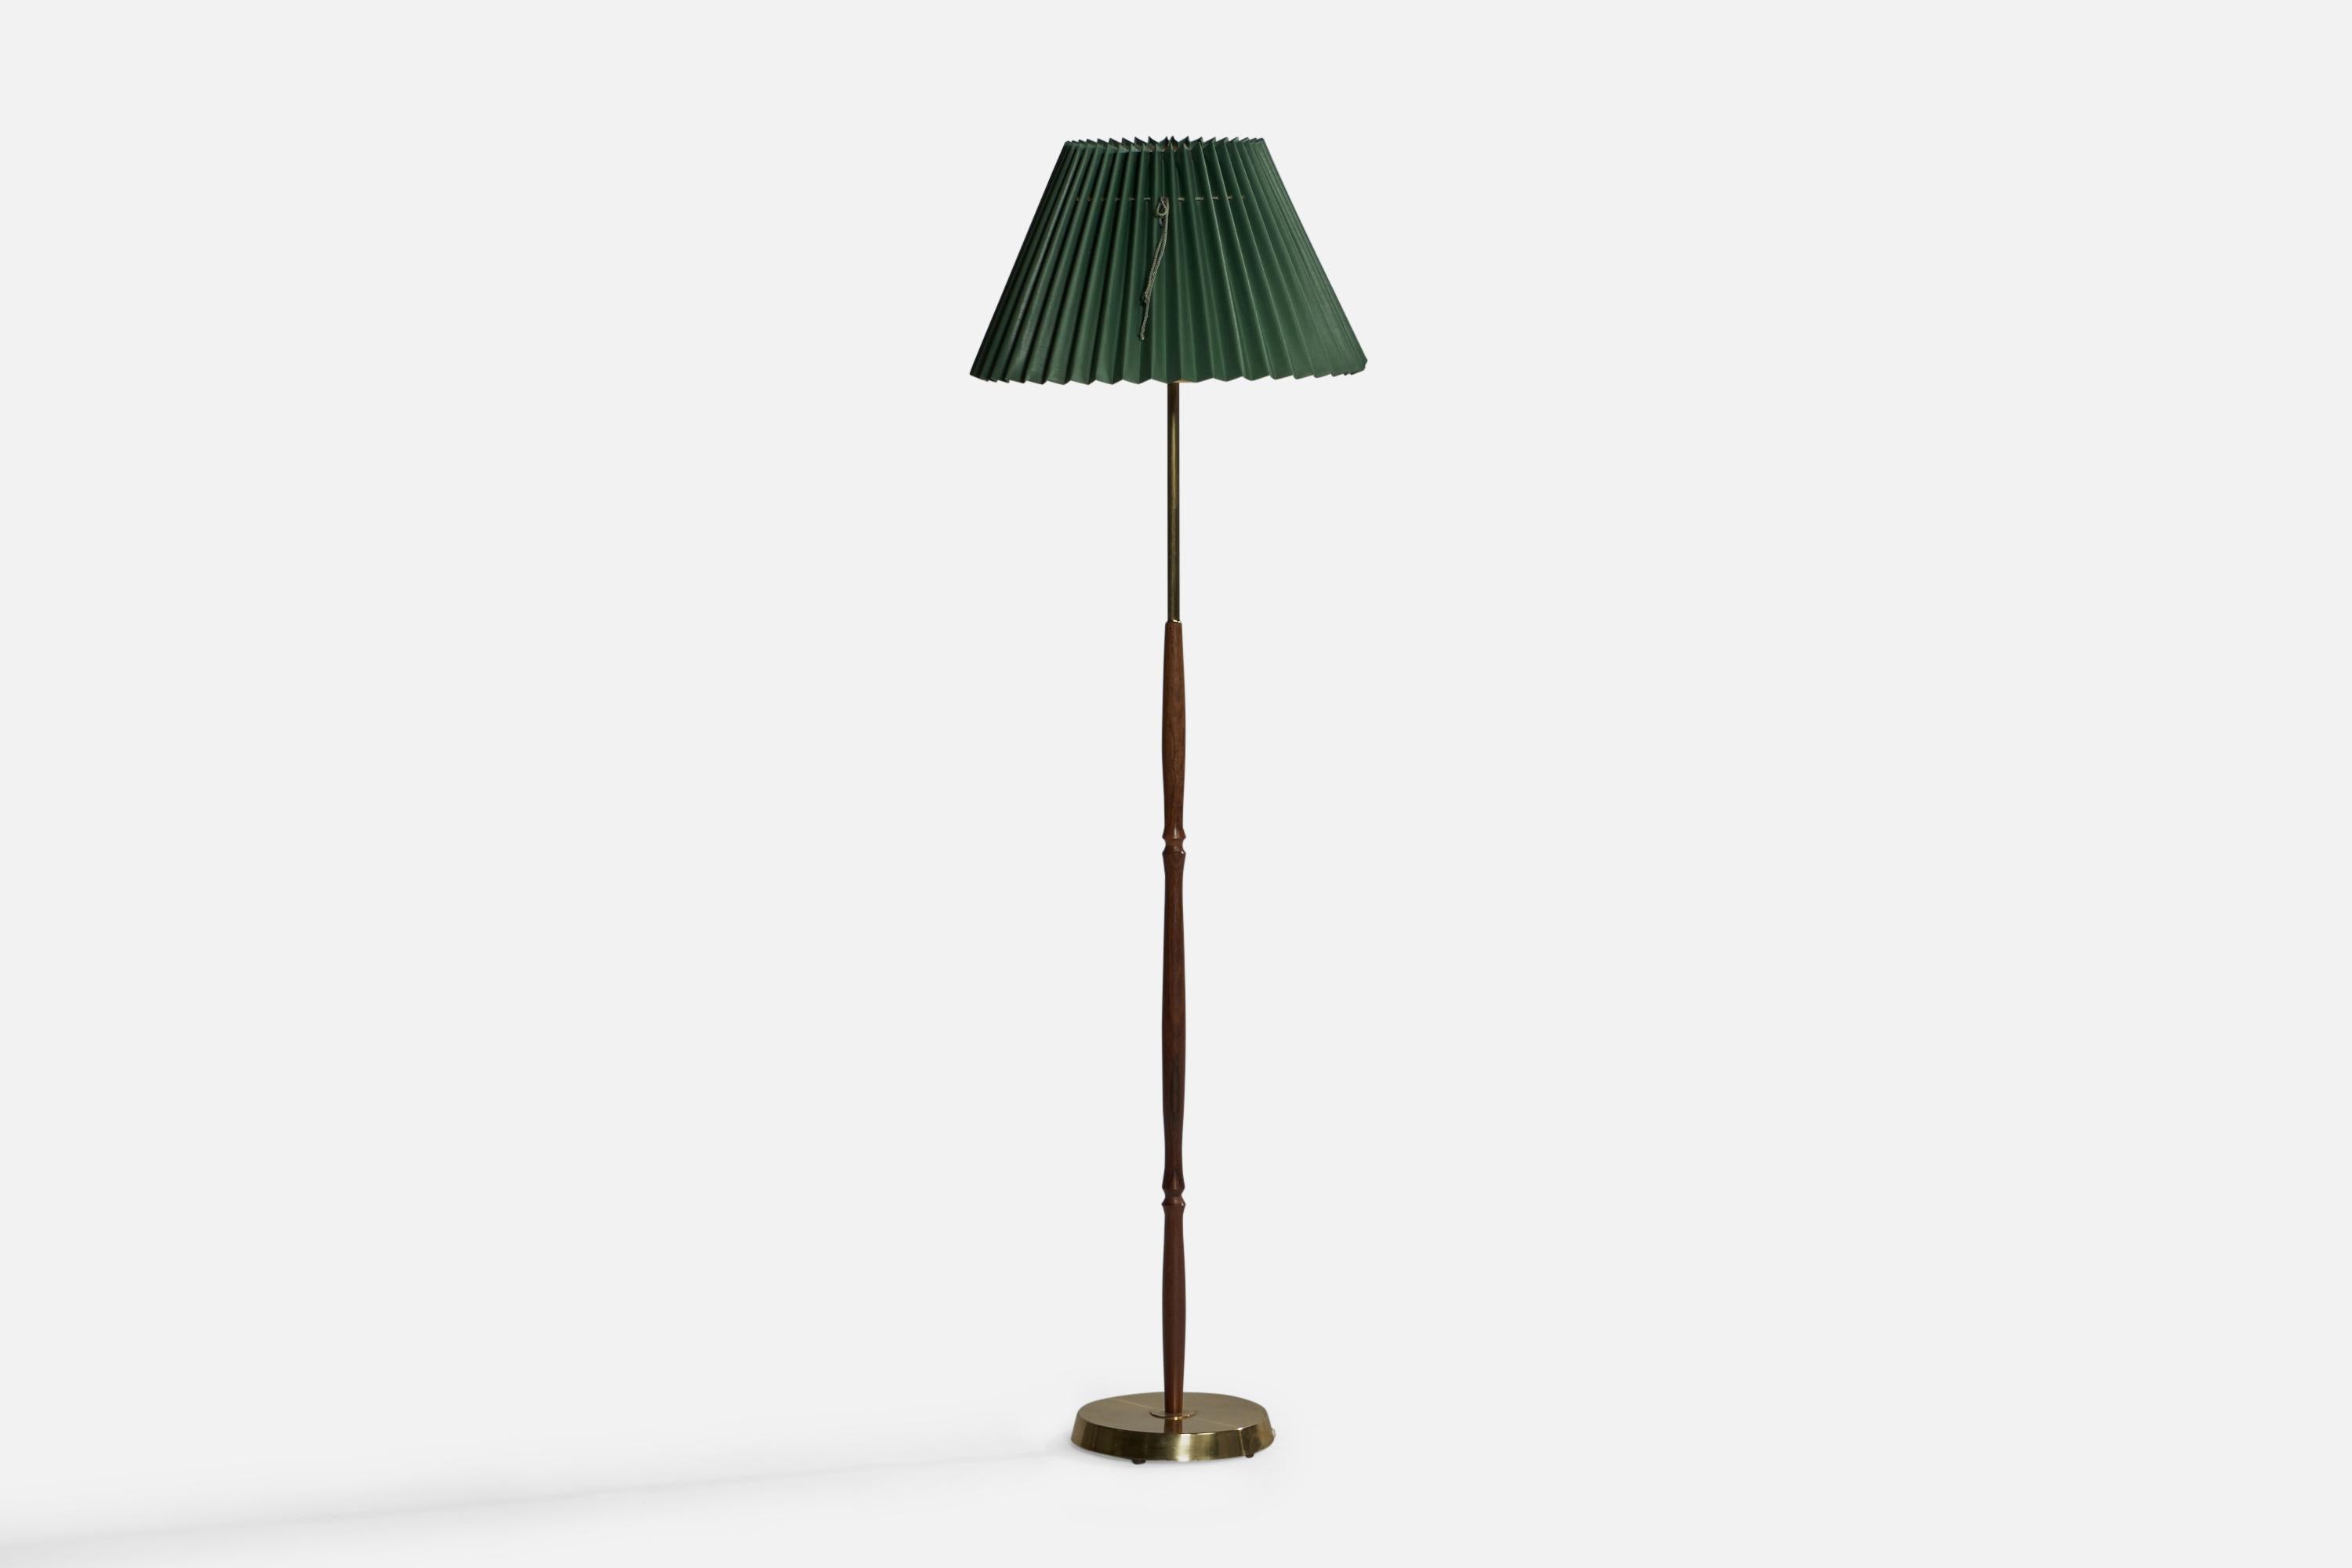 A brass, rosewood and green paper floor lamp designed and produced in Sweden, c. 1950s.

Overall Dimensions (inches): 58.45” H x 17.5” Diameter. Stated dimensions include shade.
Bulb Specifications: E-26 Bulb
Number of Sockets: 1
All lighting will